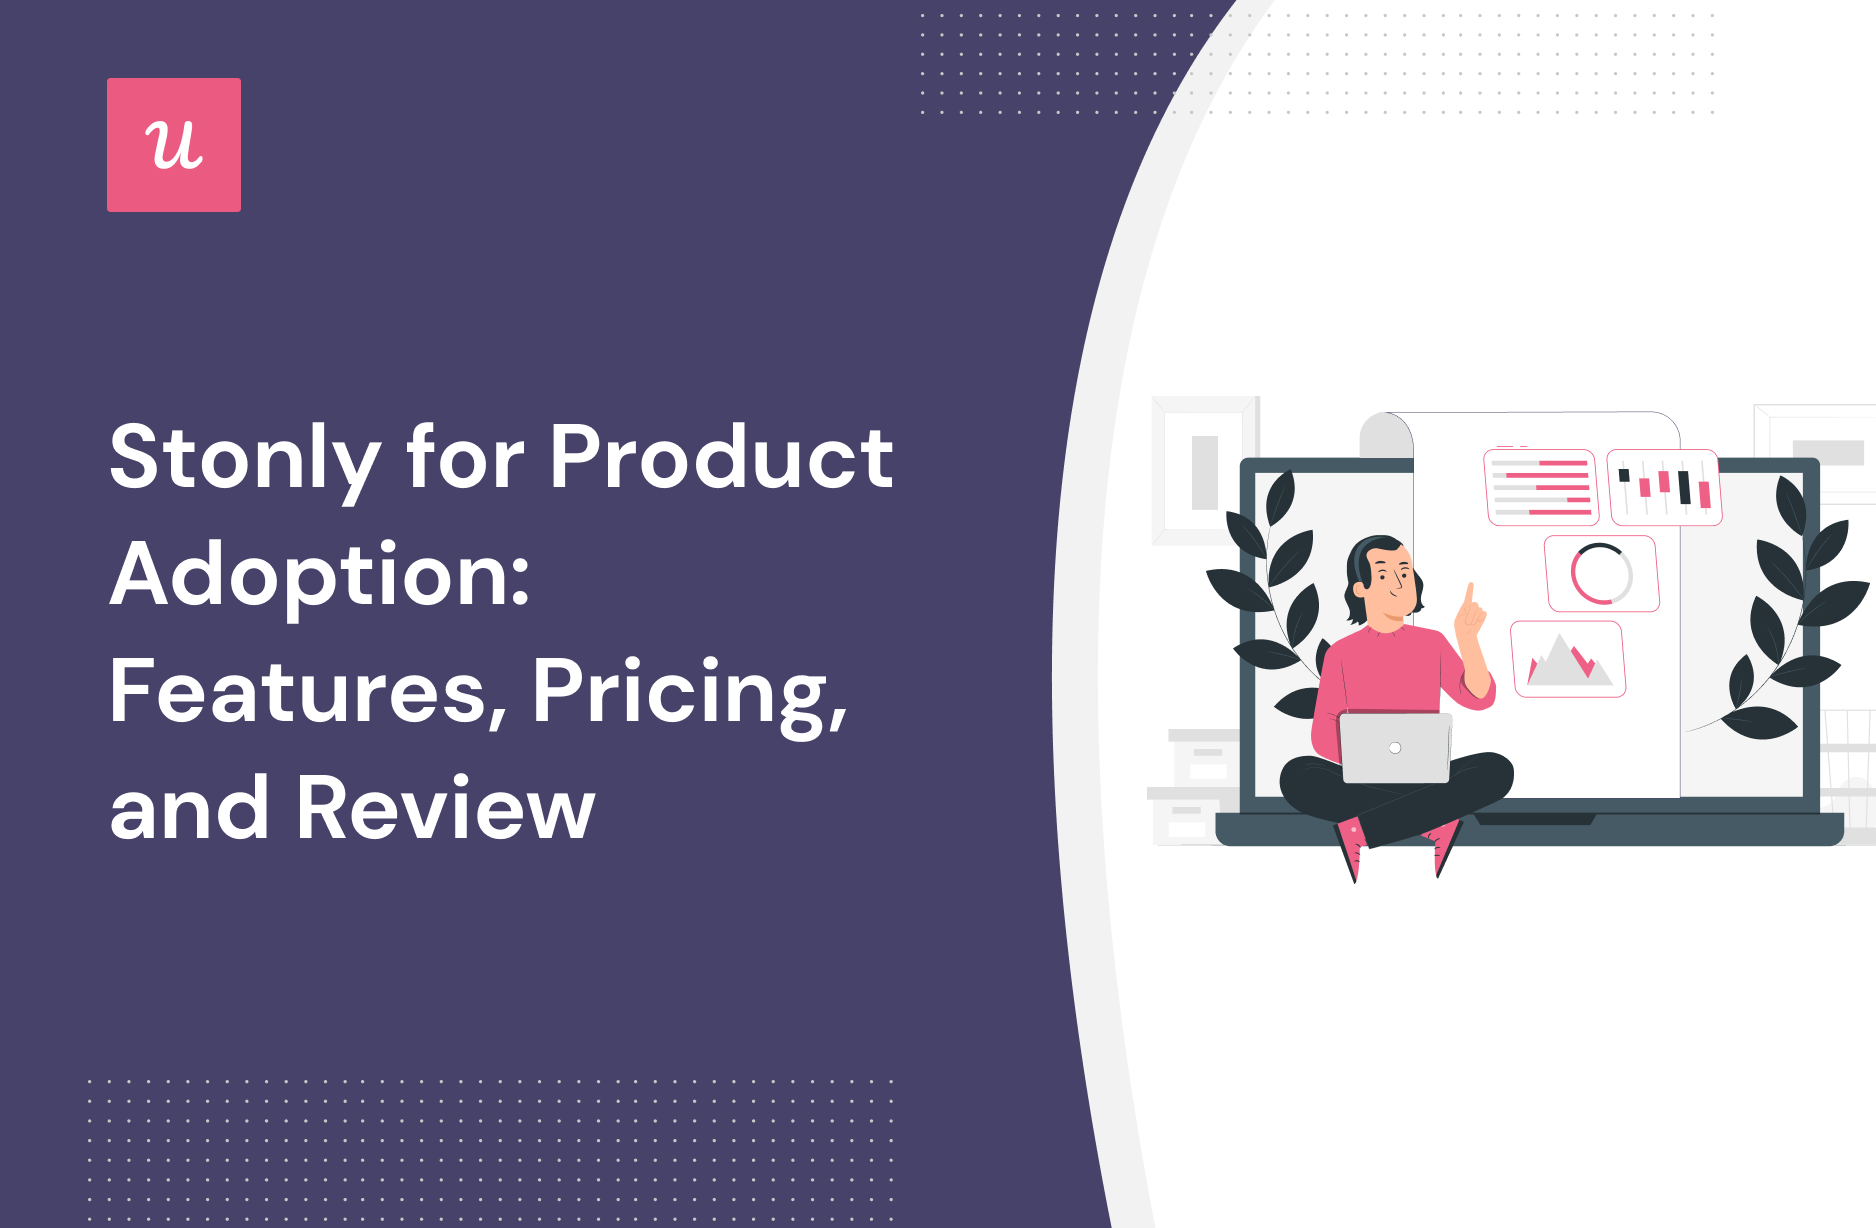 Stonly for Product Adoption: Features, Pricing, and Review